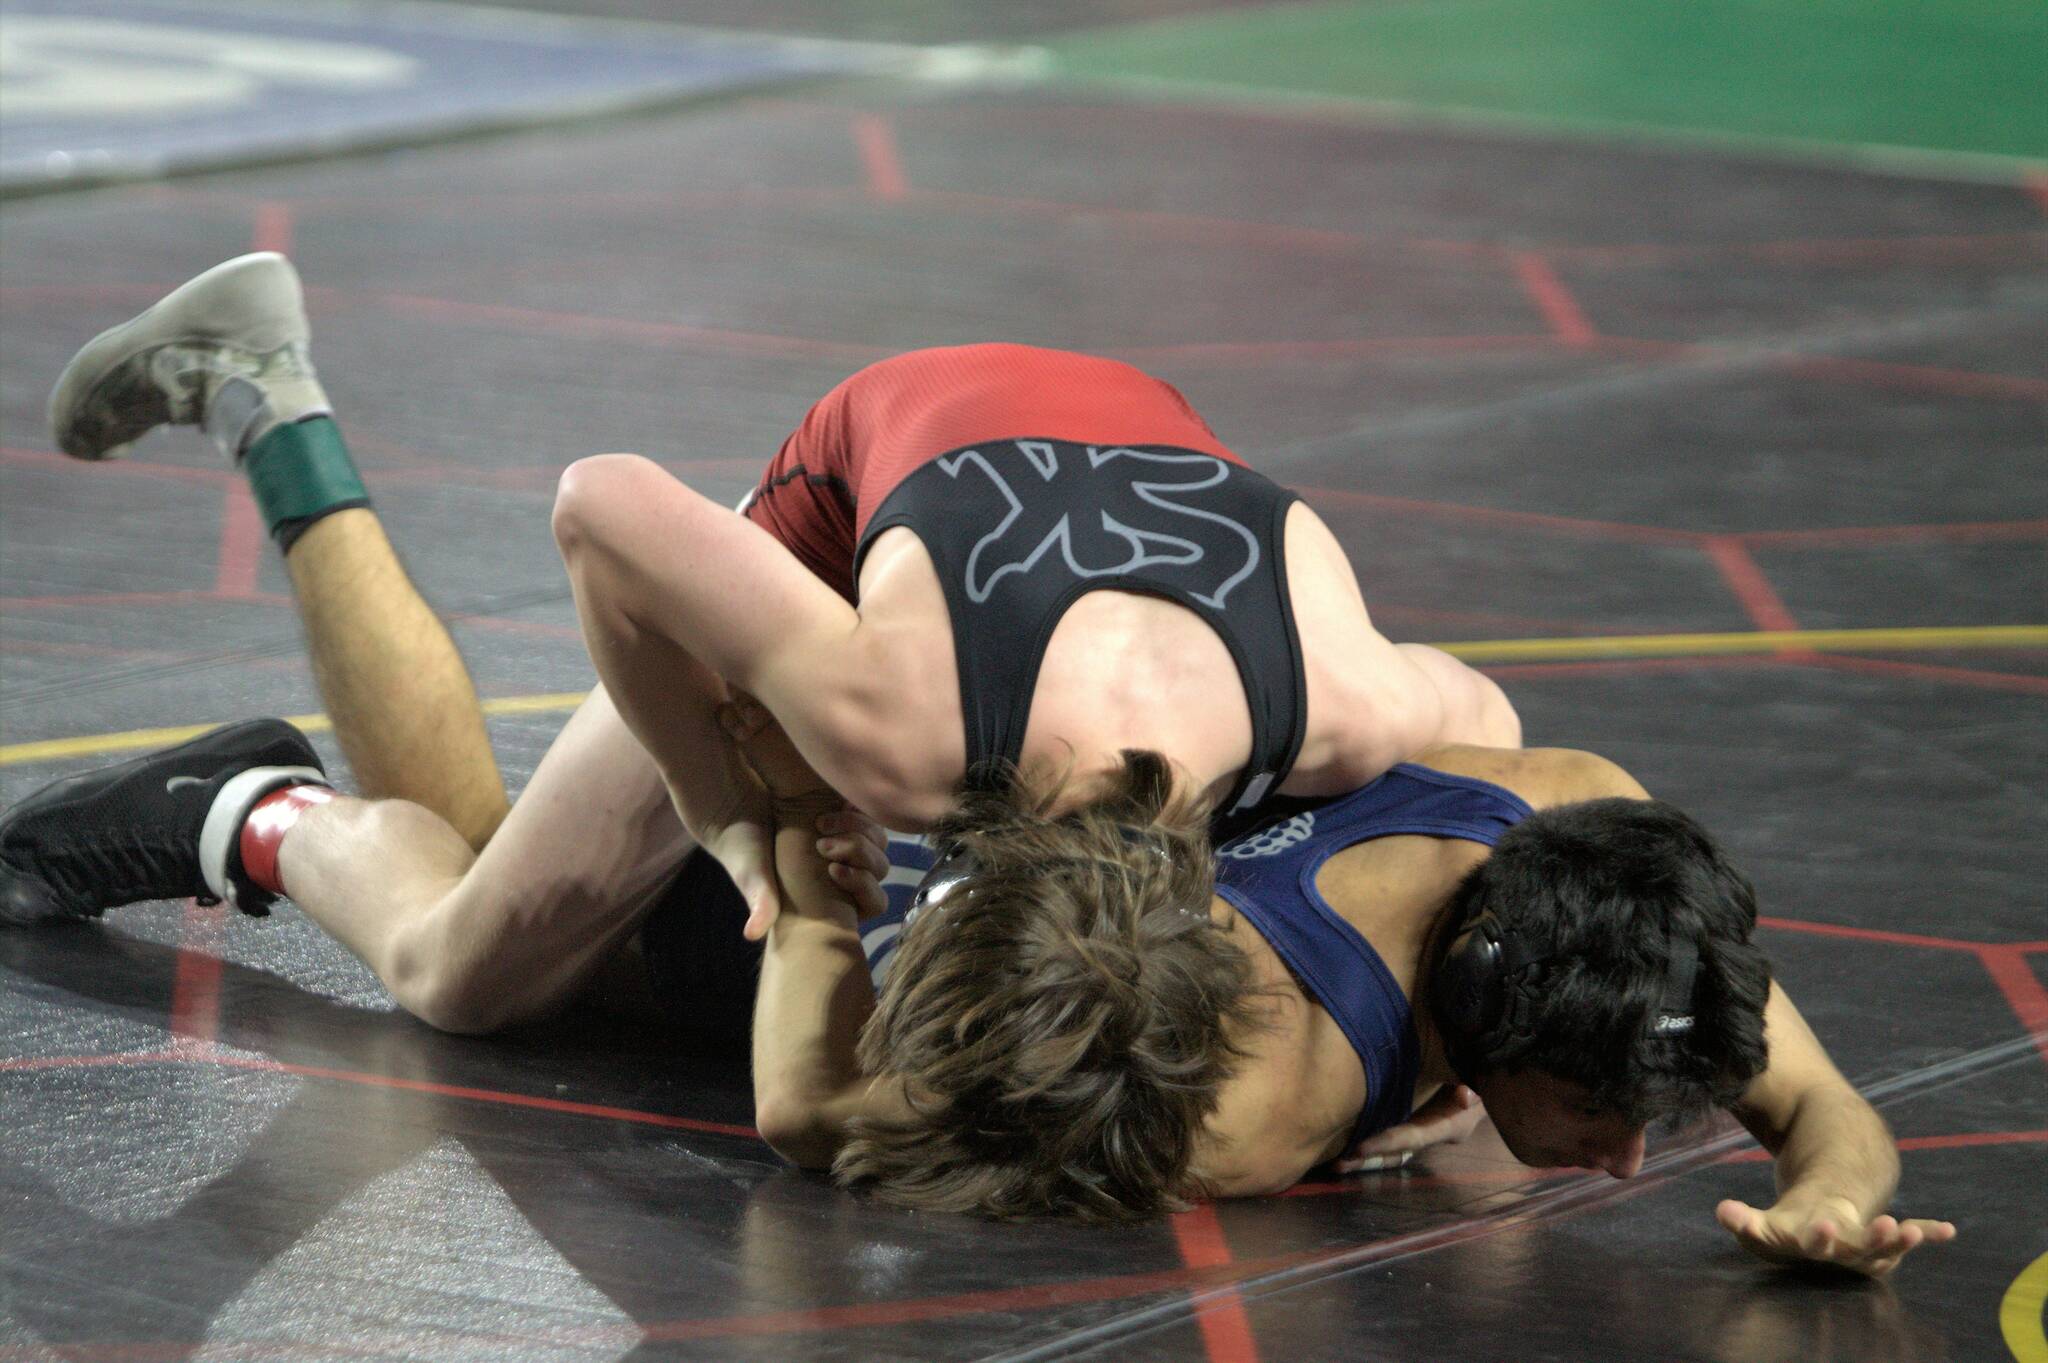 Brennen Williams of SK goes to work against another wrestler at the Mat Classic. Elisha Meyer/Kitsap News Group